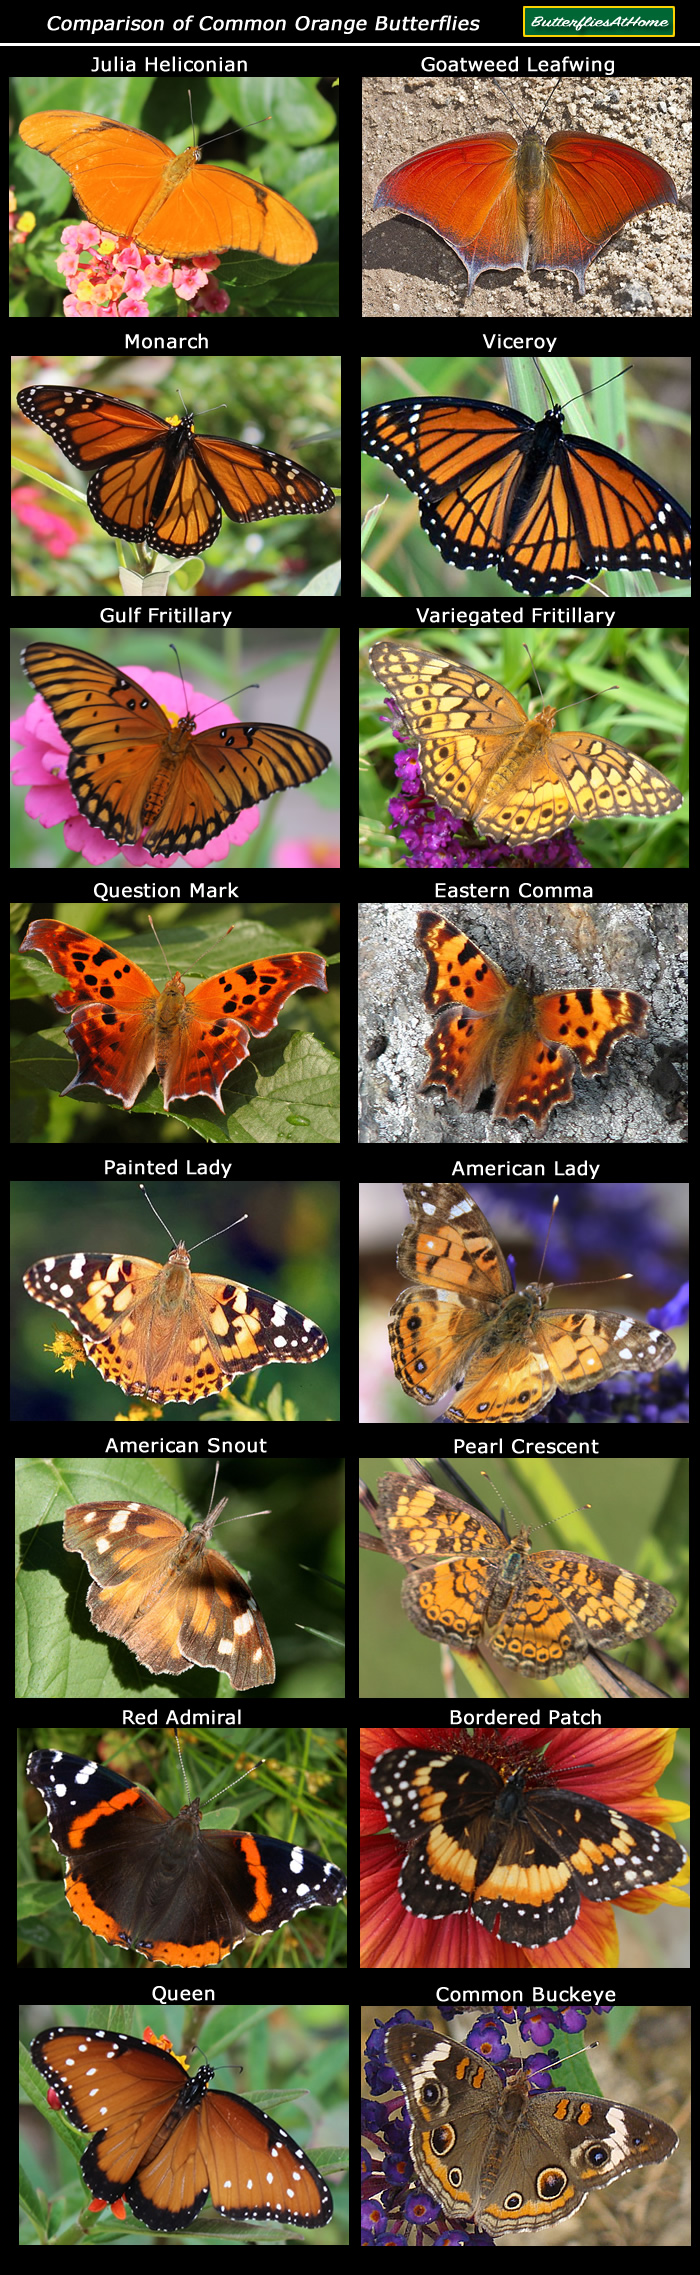 Identification chart comparing common orange colored butterflies